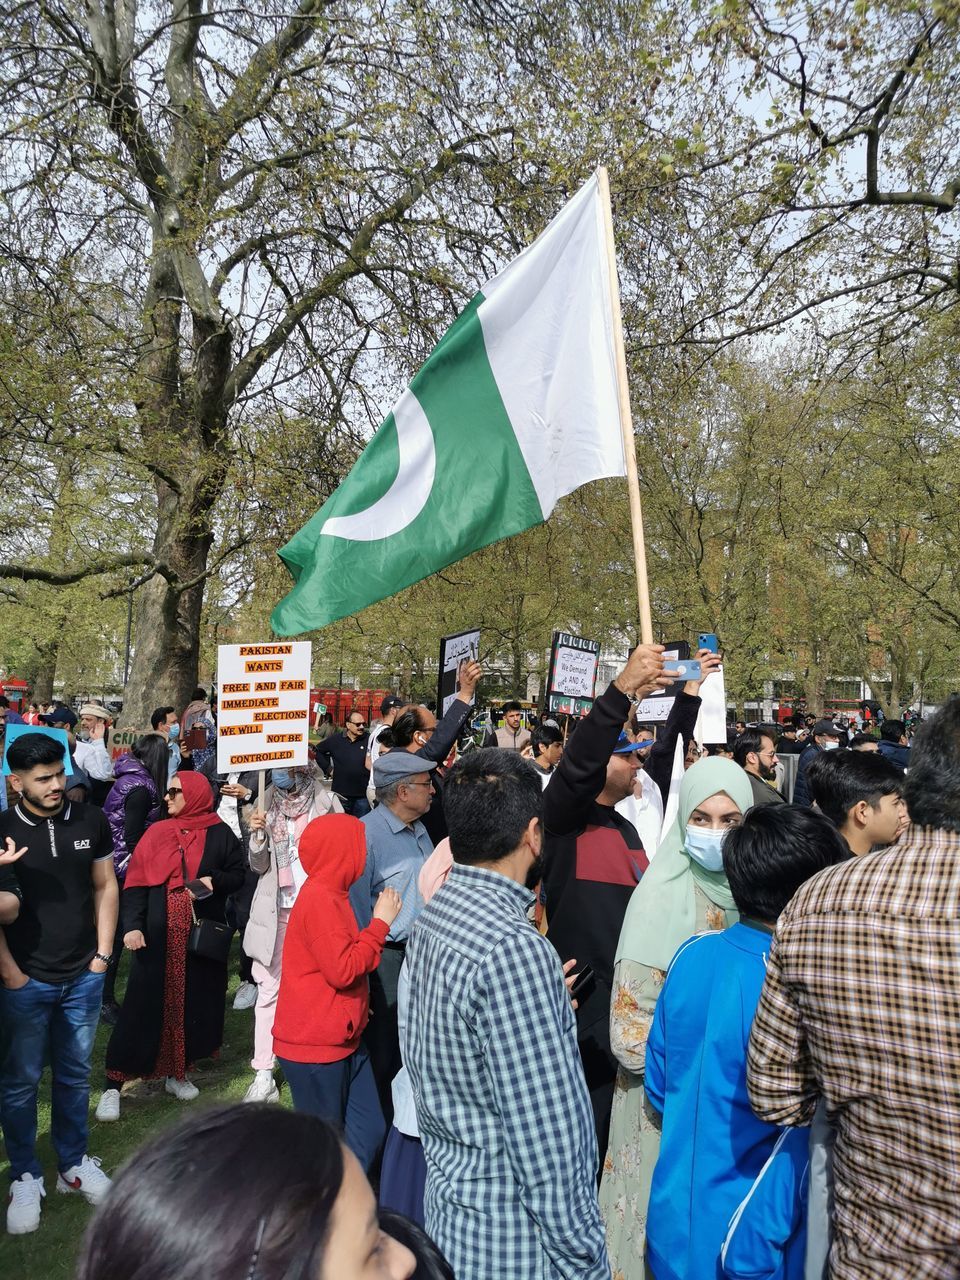 group of people, crowd, flag, tree, large group of people, patriotism, men, plant, women, adult, day, nature, outdoors, lifestyles, togetherness, protest, celebration, protestor, event, clothing, city